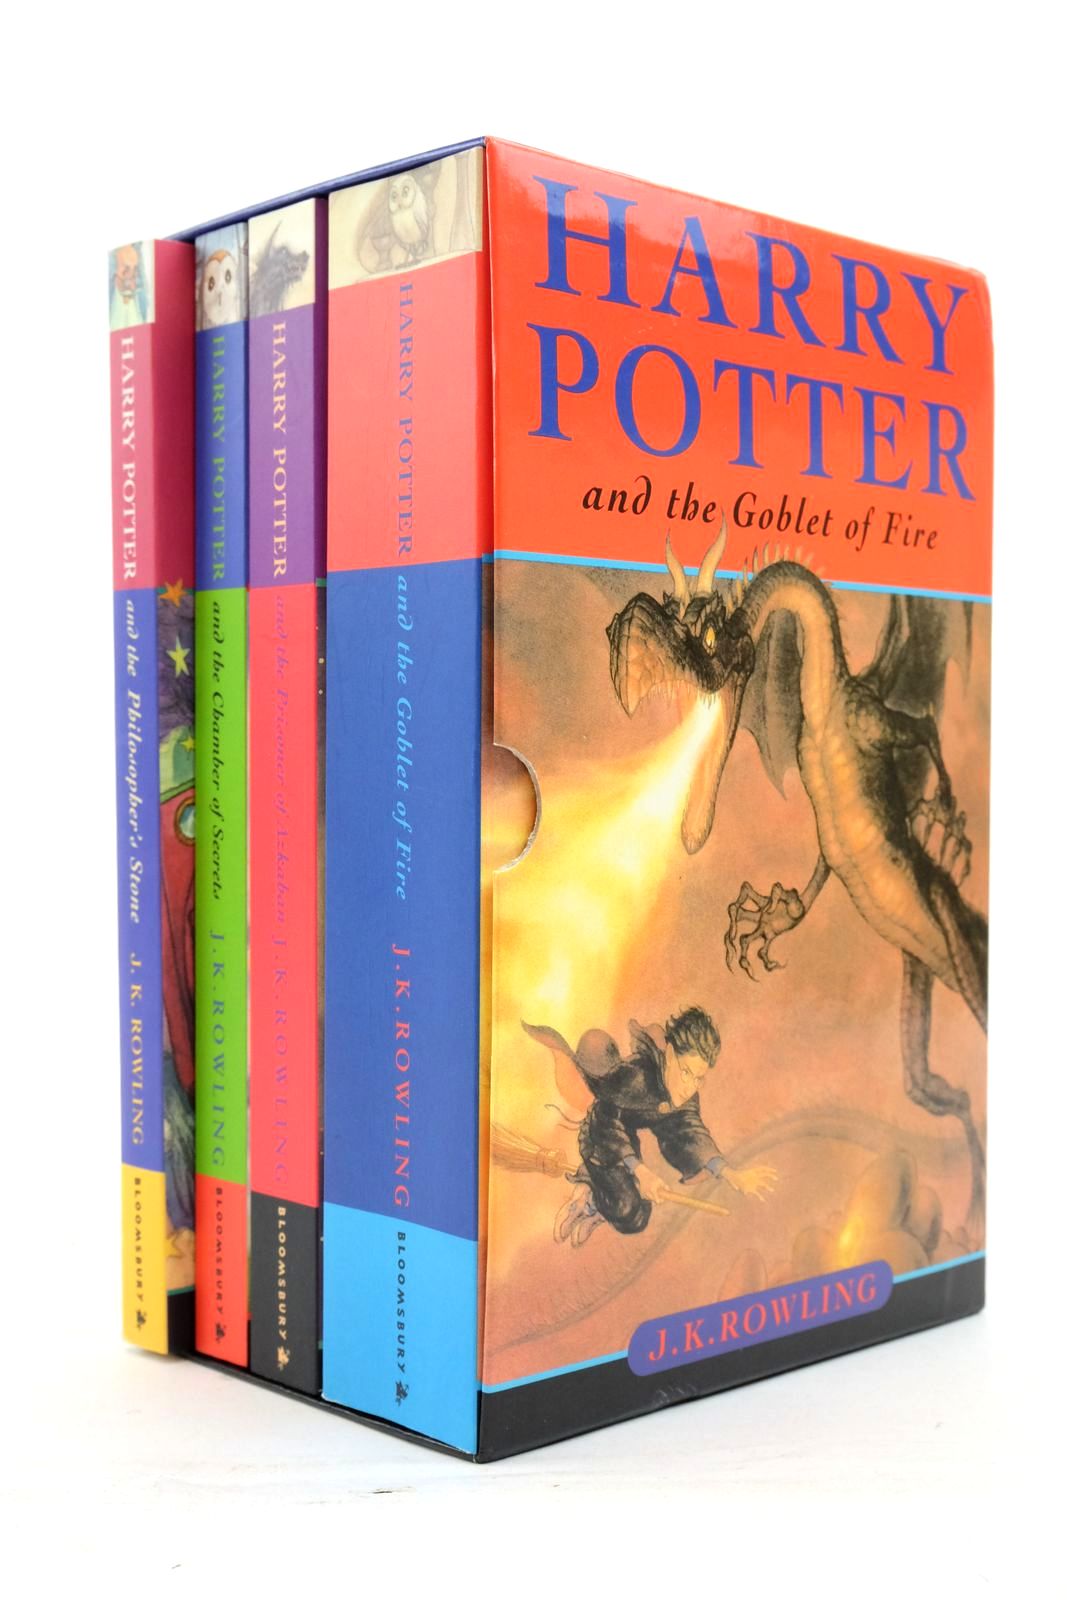 Photo of THE HARRY POTTER BOXED SET (4 VOLUMES) written by Rowling, J.K. published by Bloomsbury (STOCK CODE: 2137987)  for sale by Stella & Rose's Books